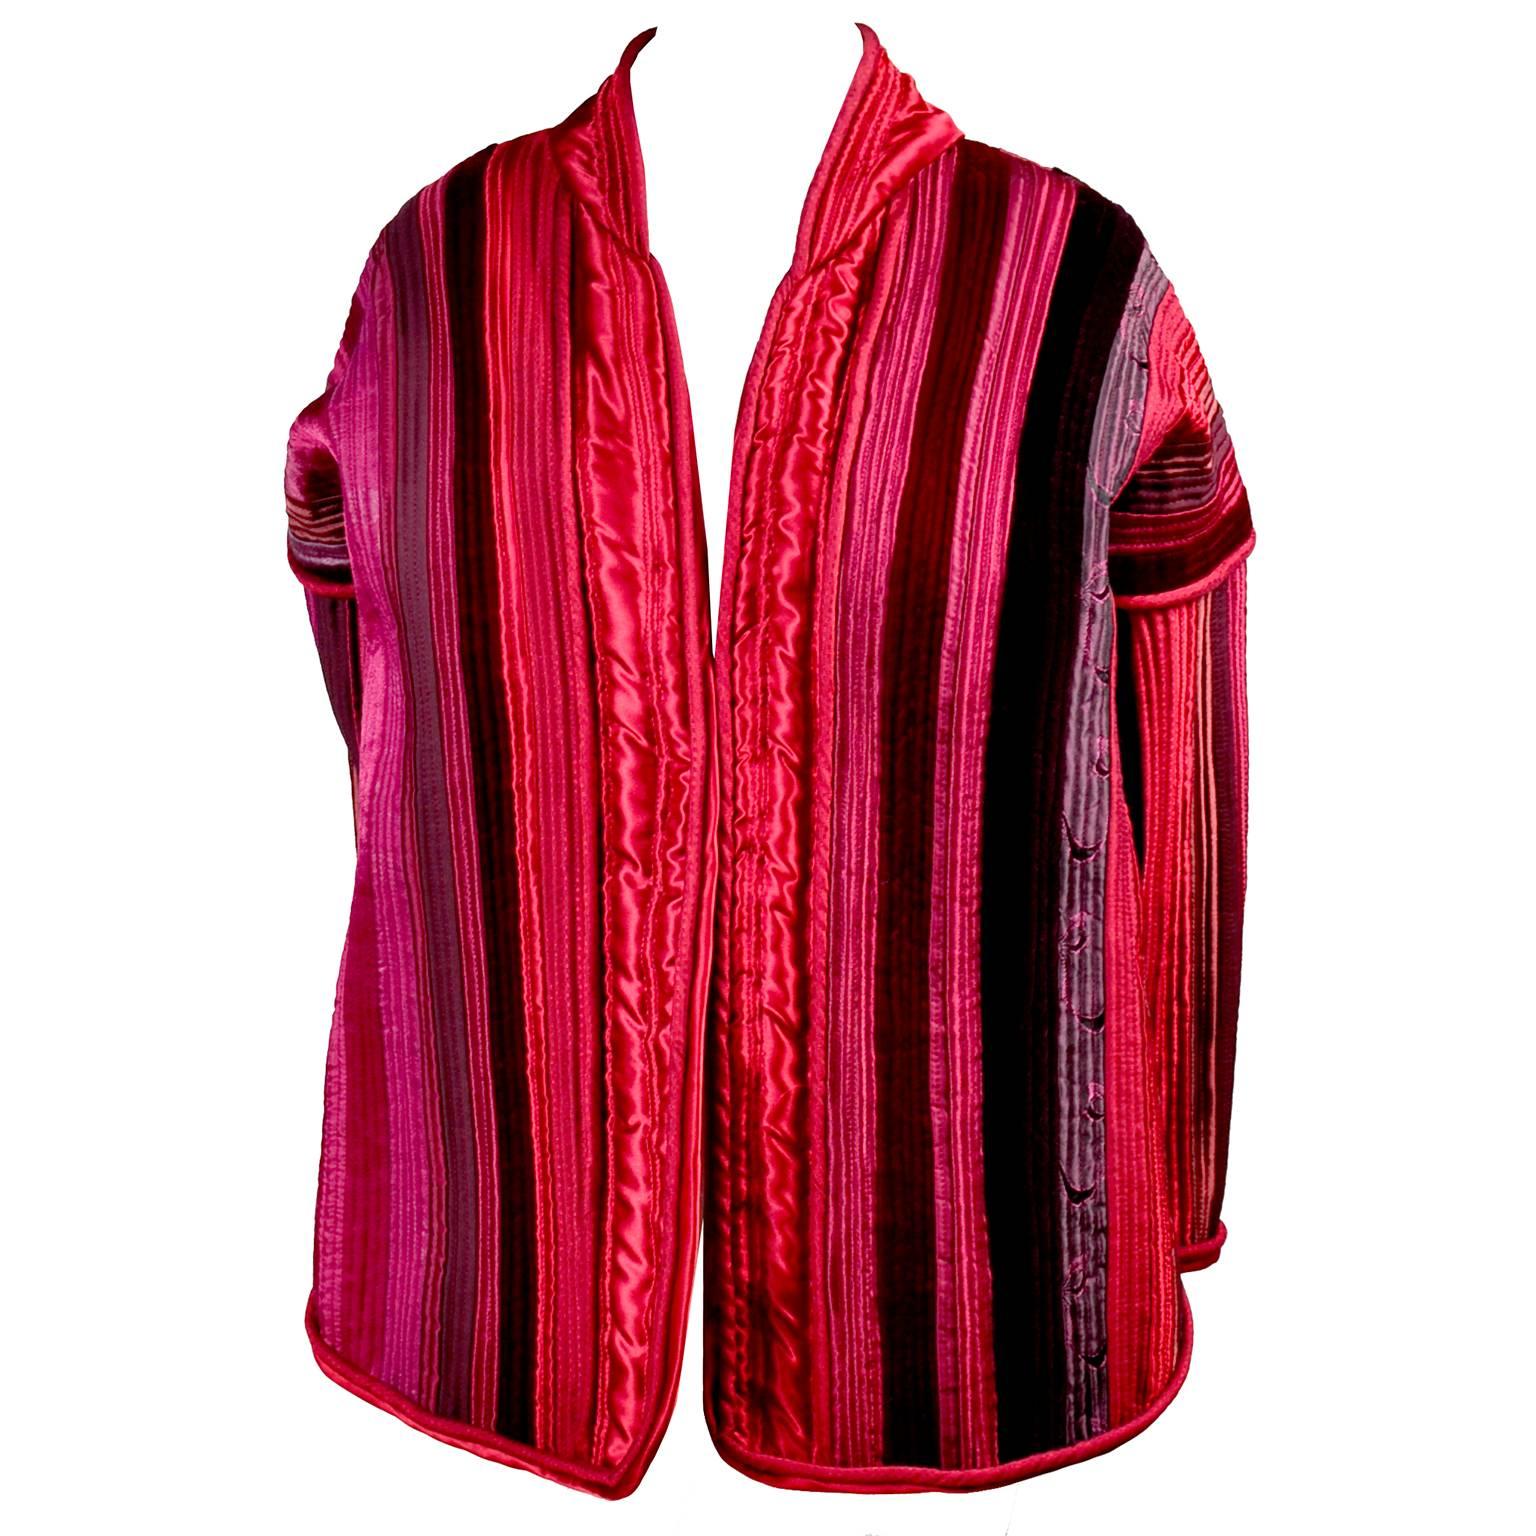 Rich reds, pink and purple make this silk satin and velvet jacket a stunning piece!  This one of a kind jacket was purchased at a high end clothing boutique called Elizabeth Street in Portland Oregon in the late 1980's.  The owner carried many one